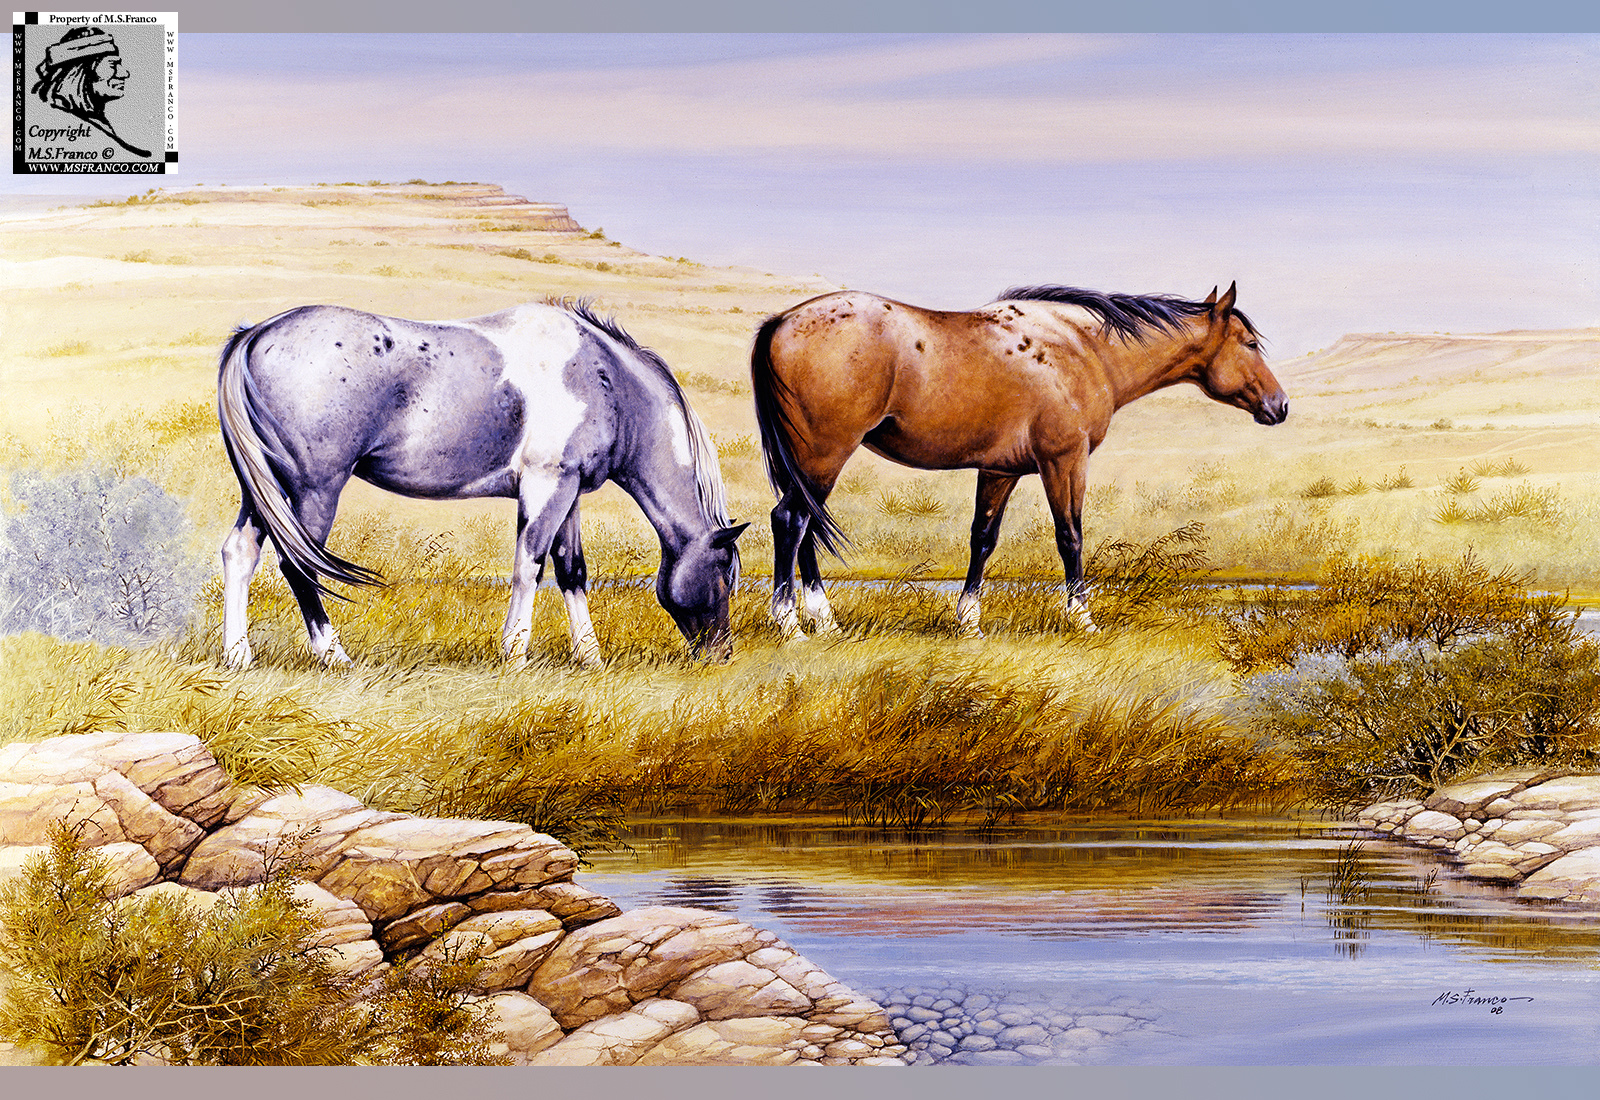 "Tranquility on the Open Range"